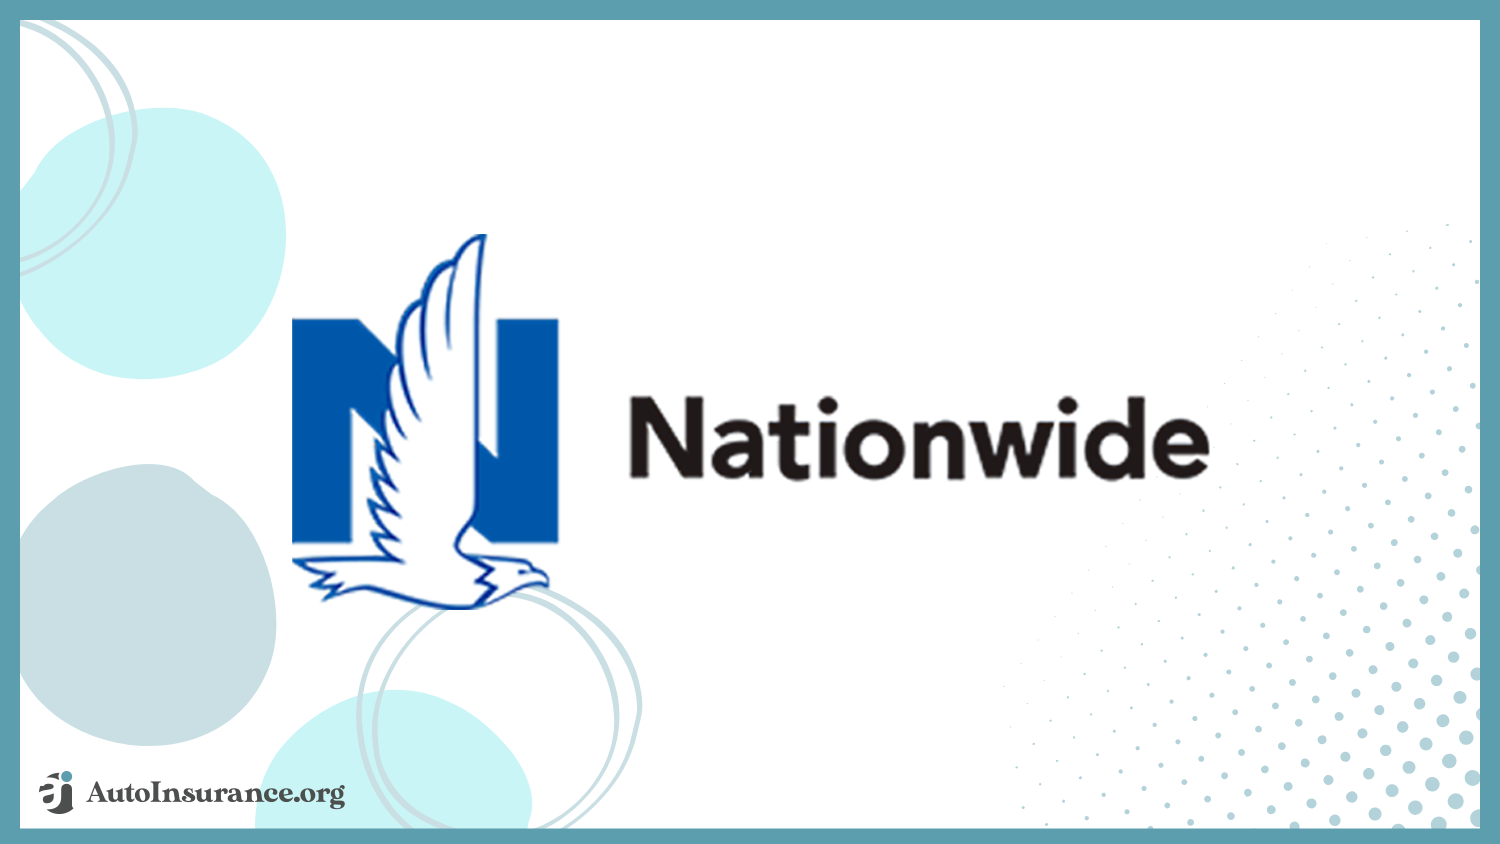 Nationwide: Best Auto Insurance for Hybrid Vehicles